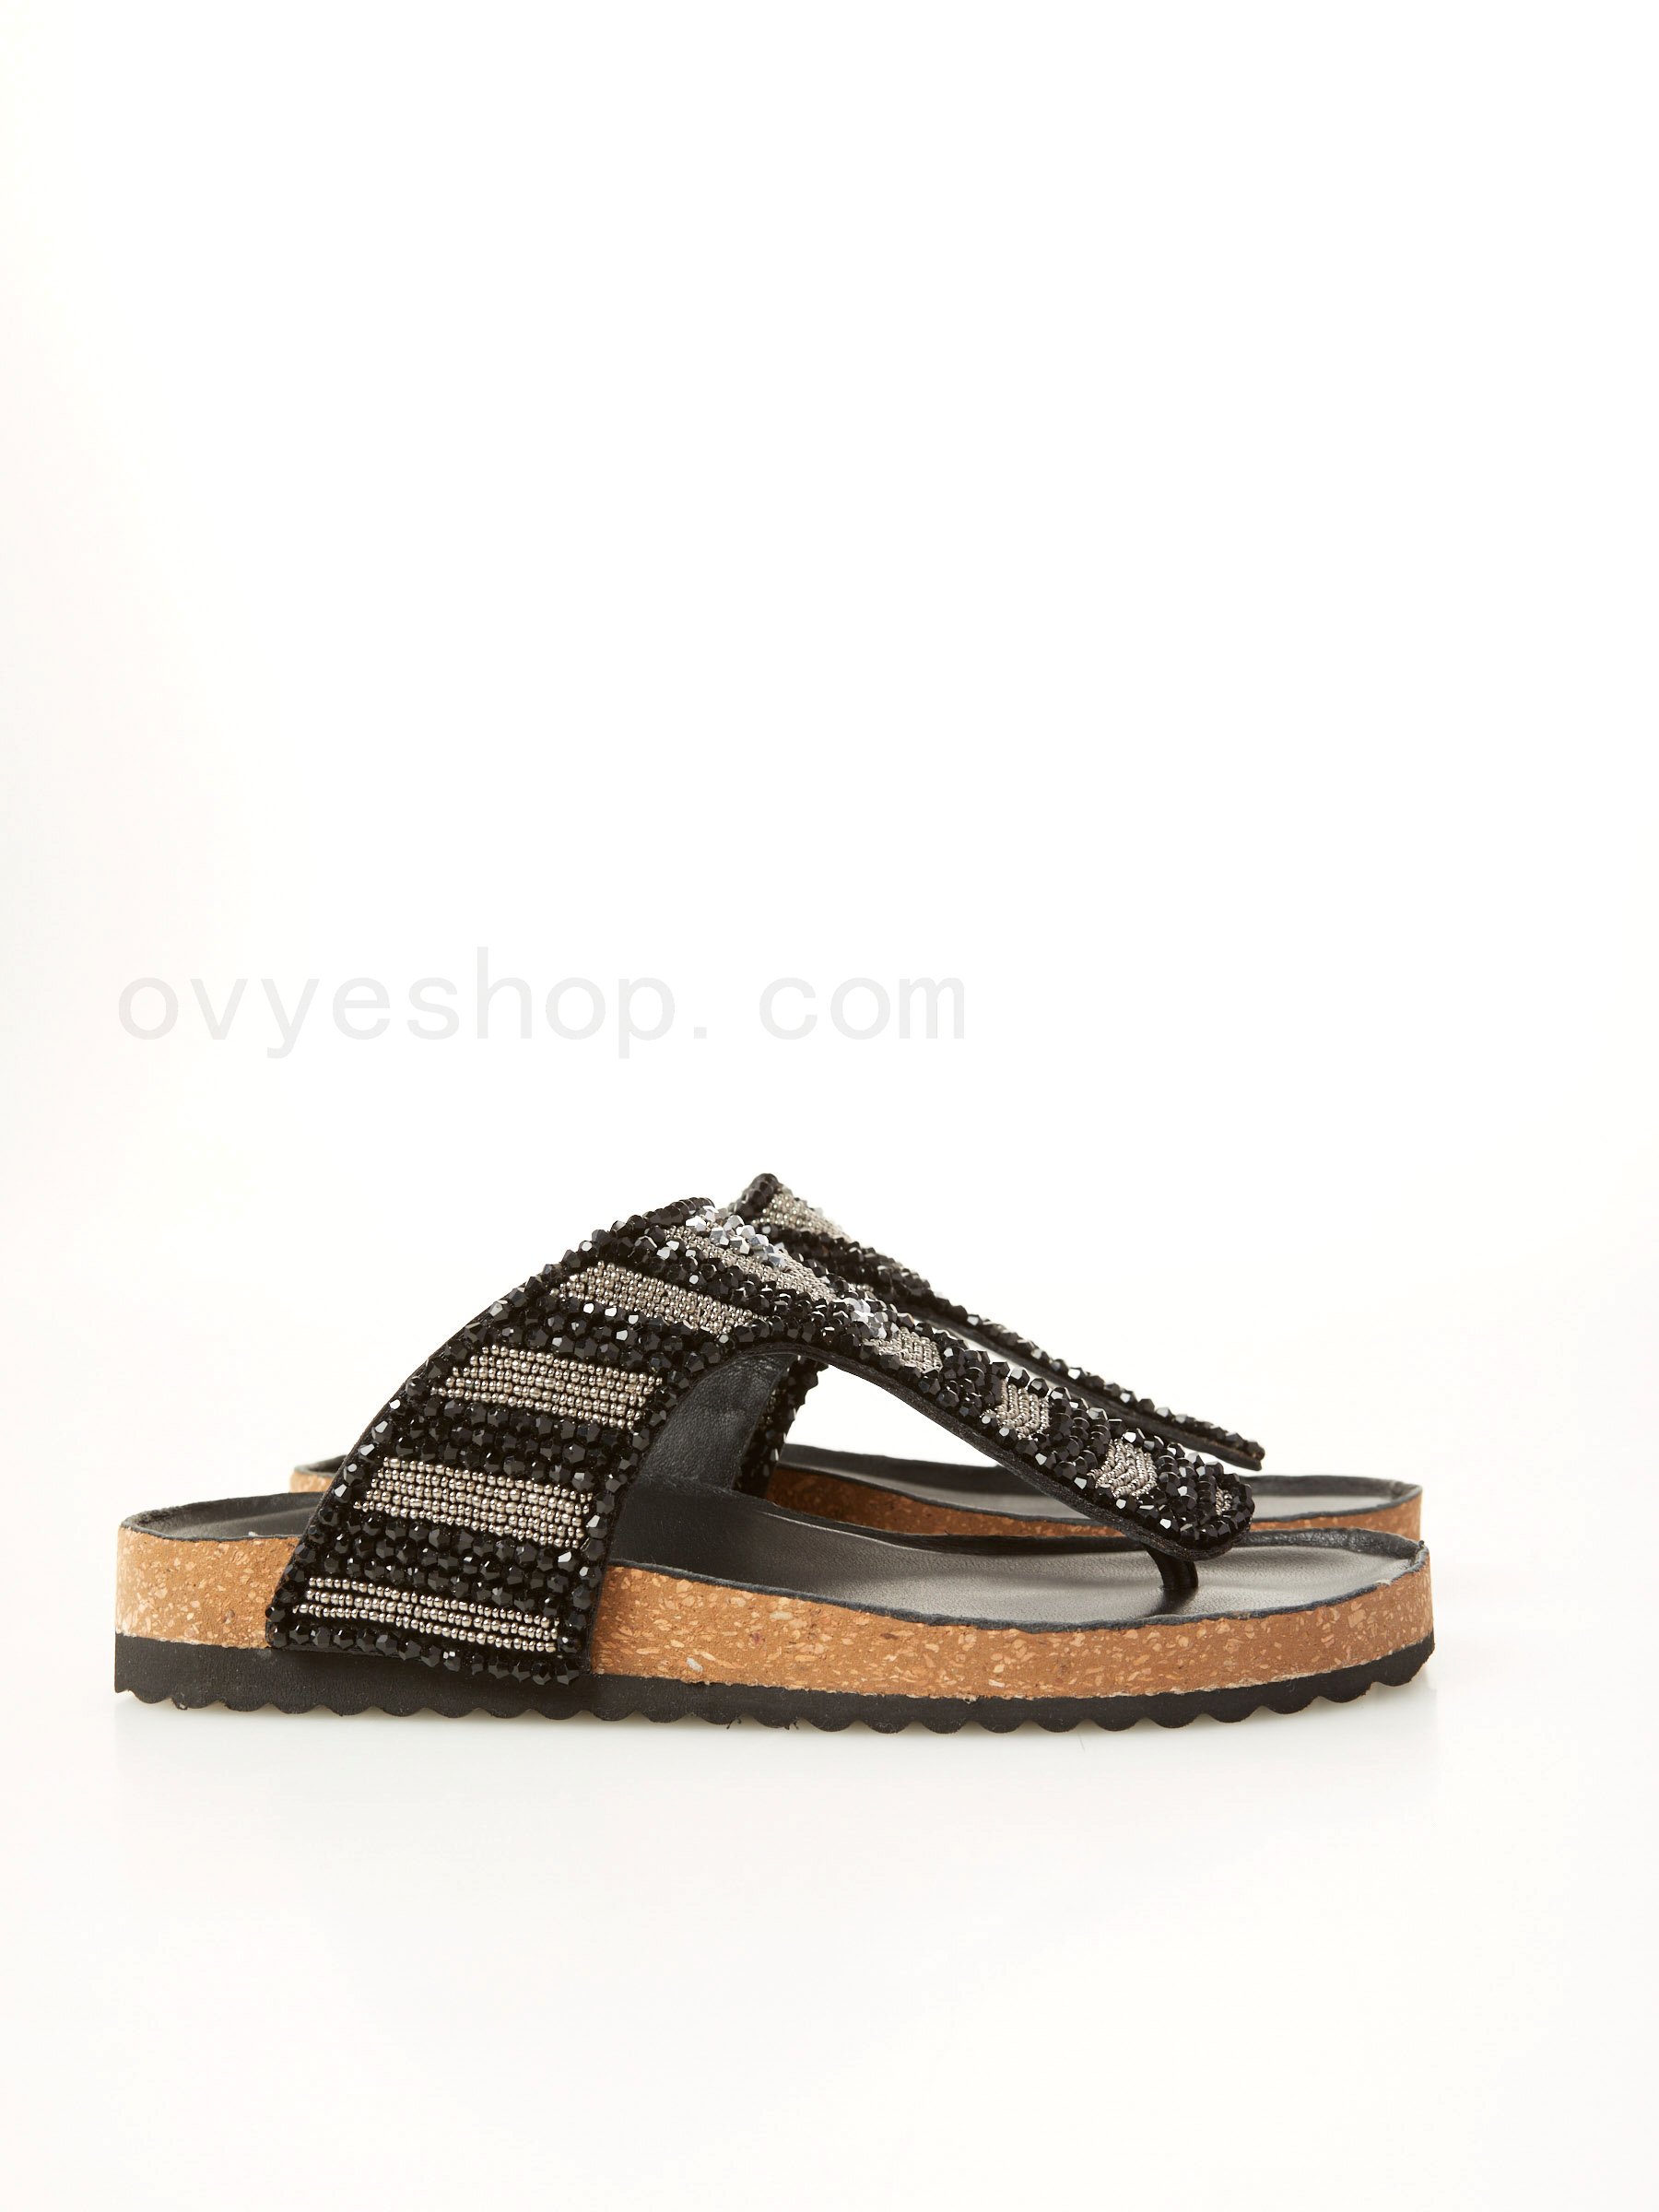 85% Codice Sconto Flip Flop With Beads F0817885-0535 ovy&#232; outlet